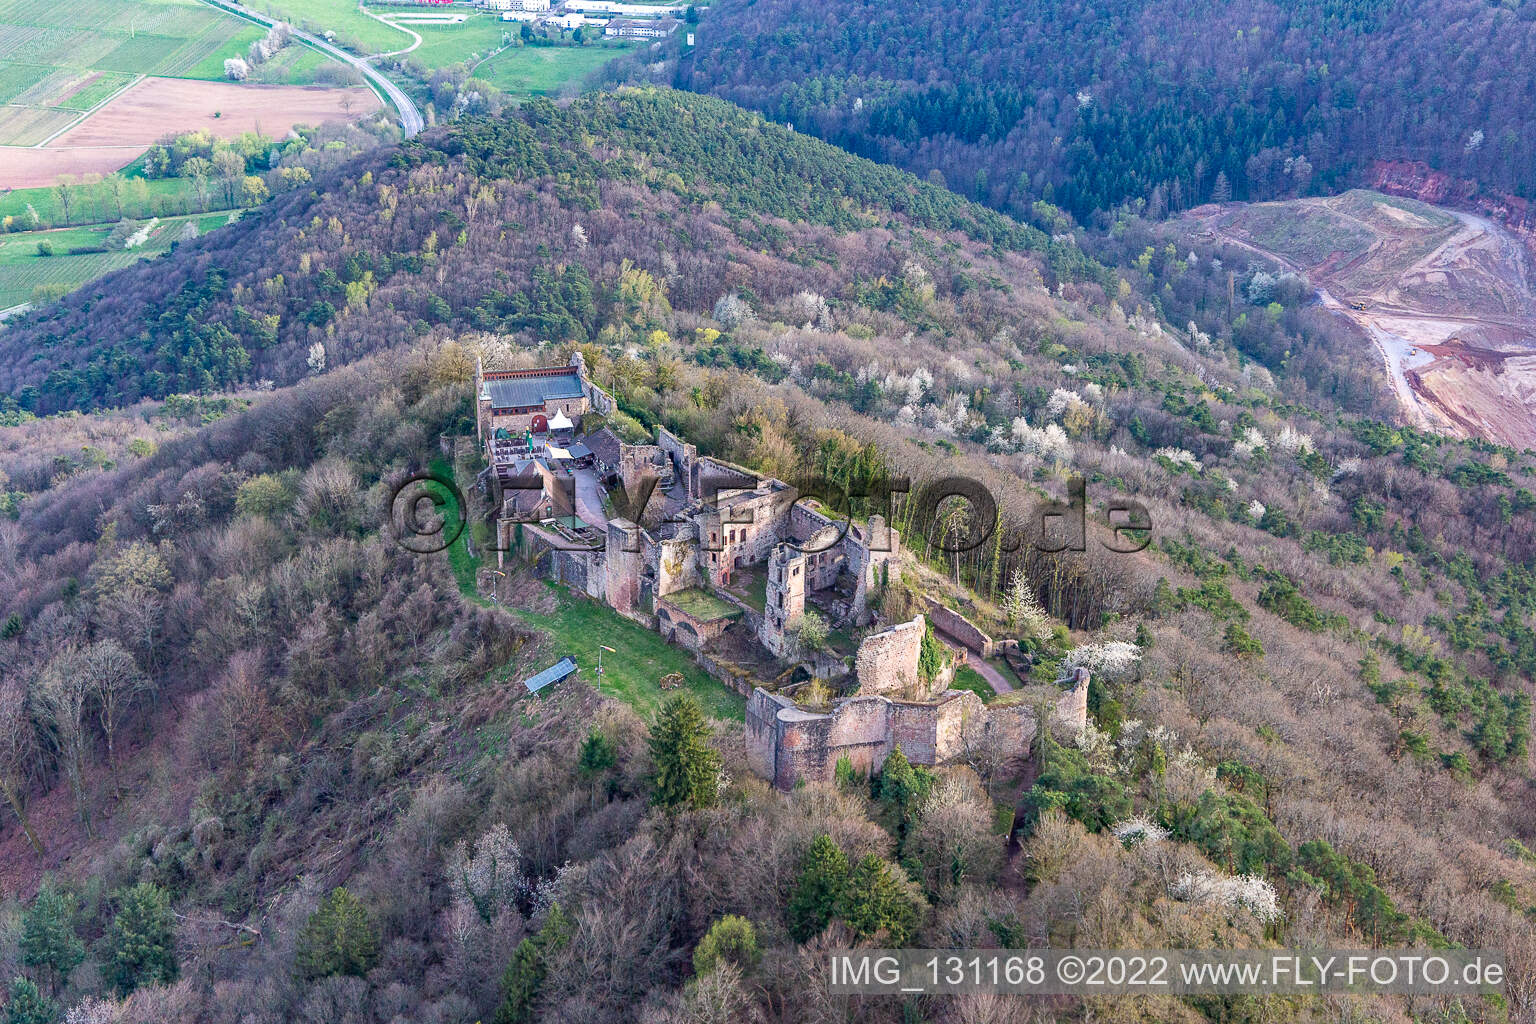 Drone recording of Madenburg in Eschbach in the state Rhineland-Palatinate, Germany